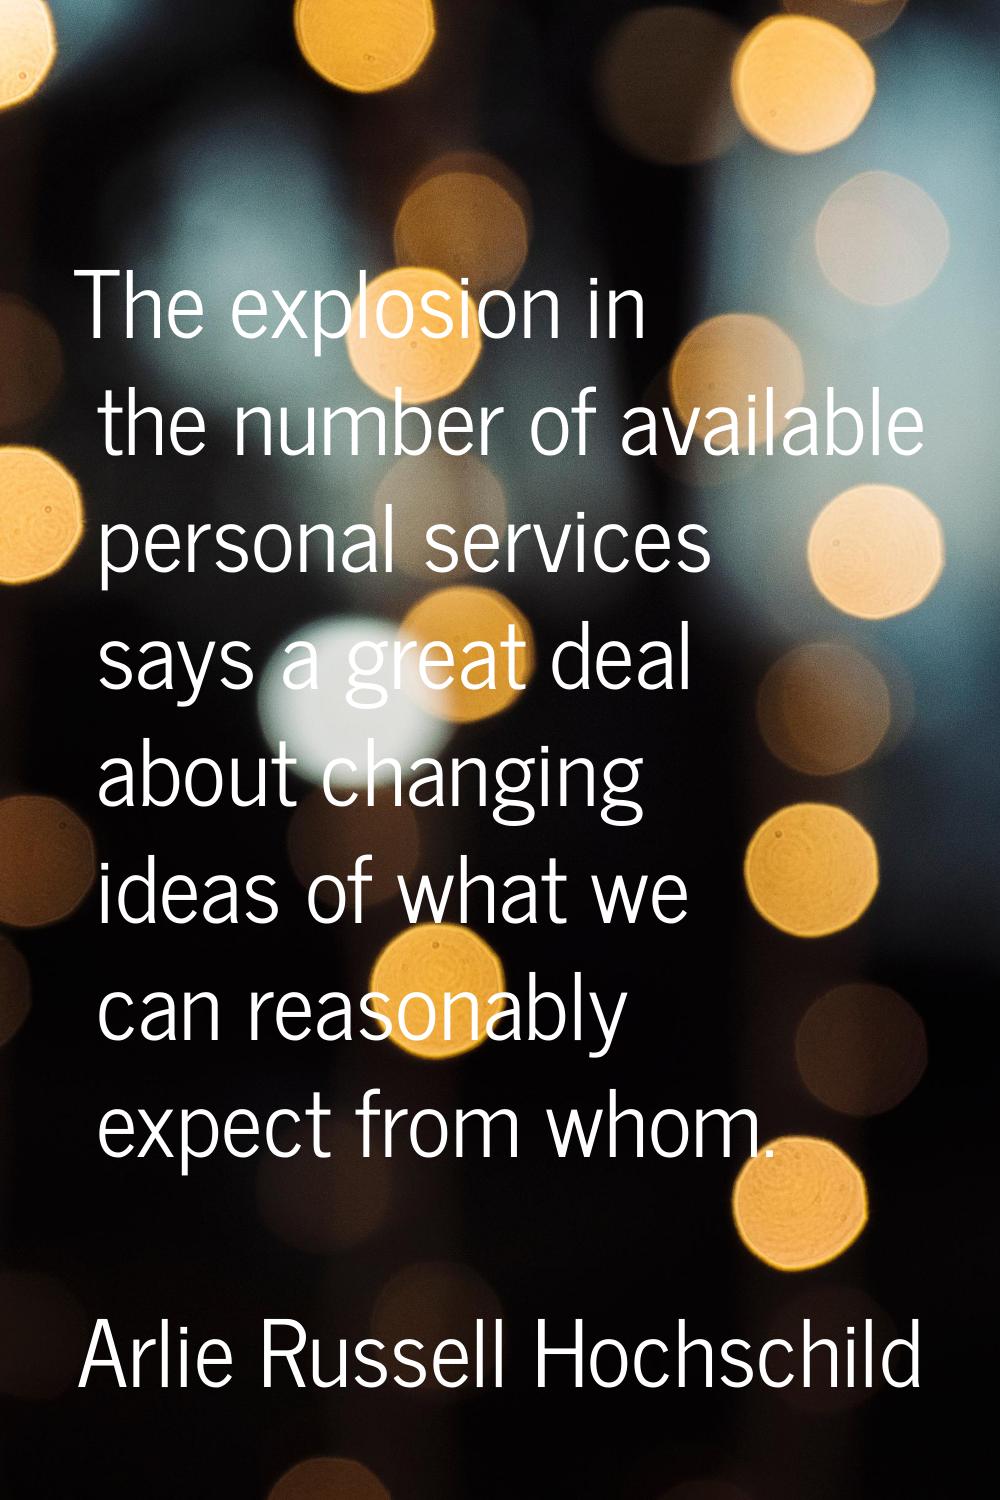 The explosion in the number of available personal services says a great deal about changing ideas o